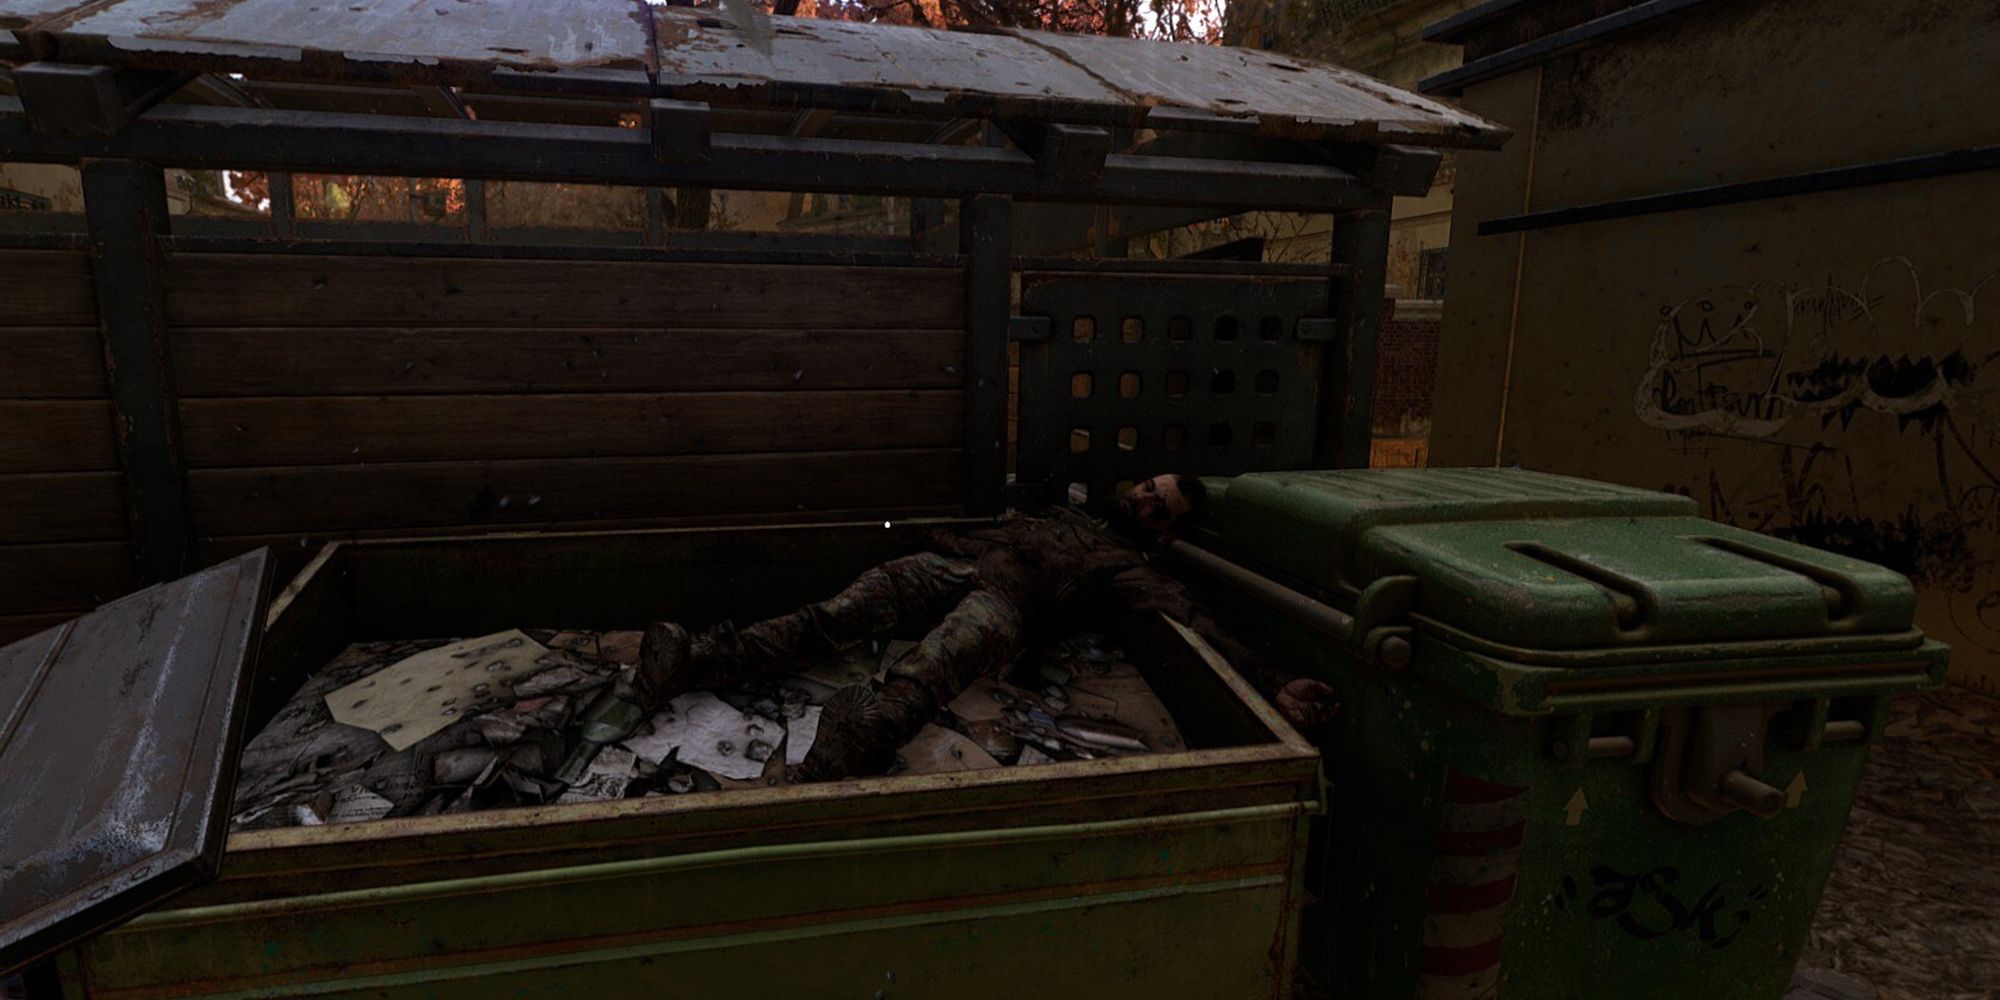 Dying Light 2 - Looking At One Of The Covered Areas Where The Dumpsters Are In-Game